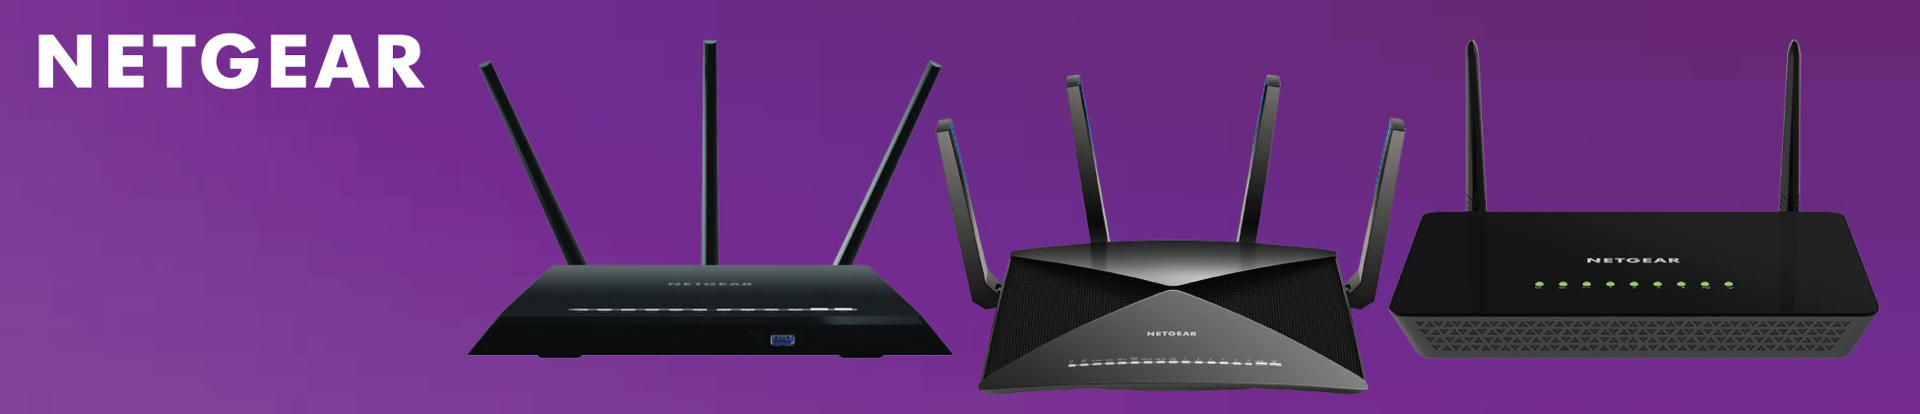 Picture for brand netgear